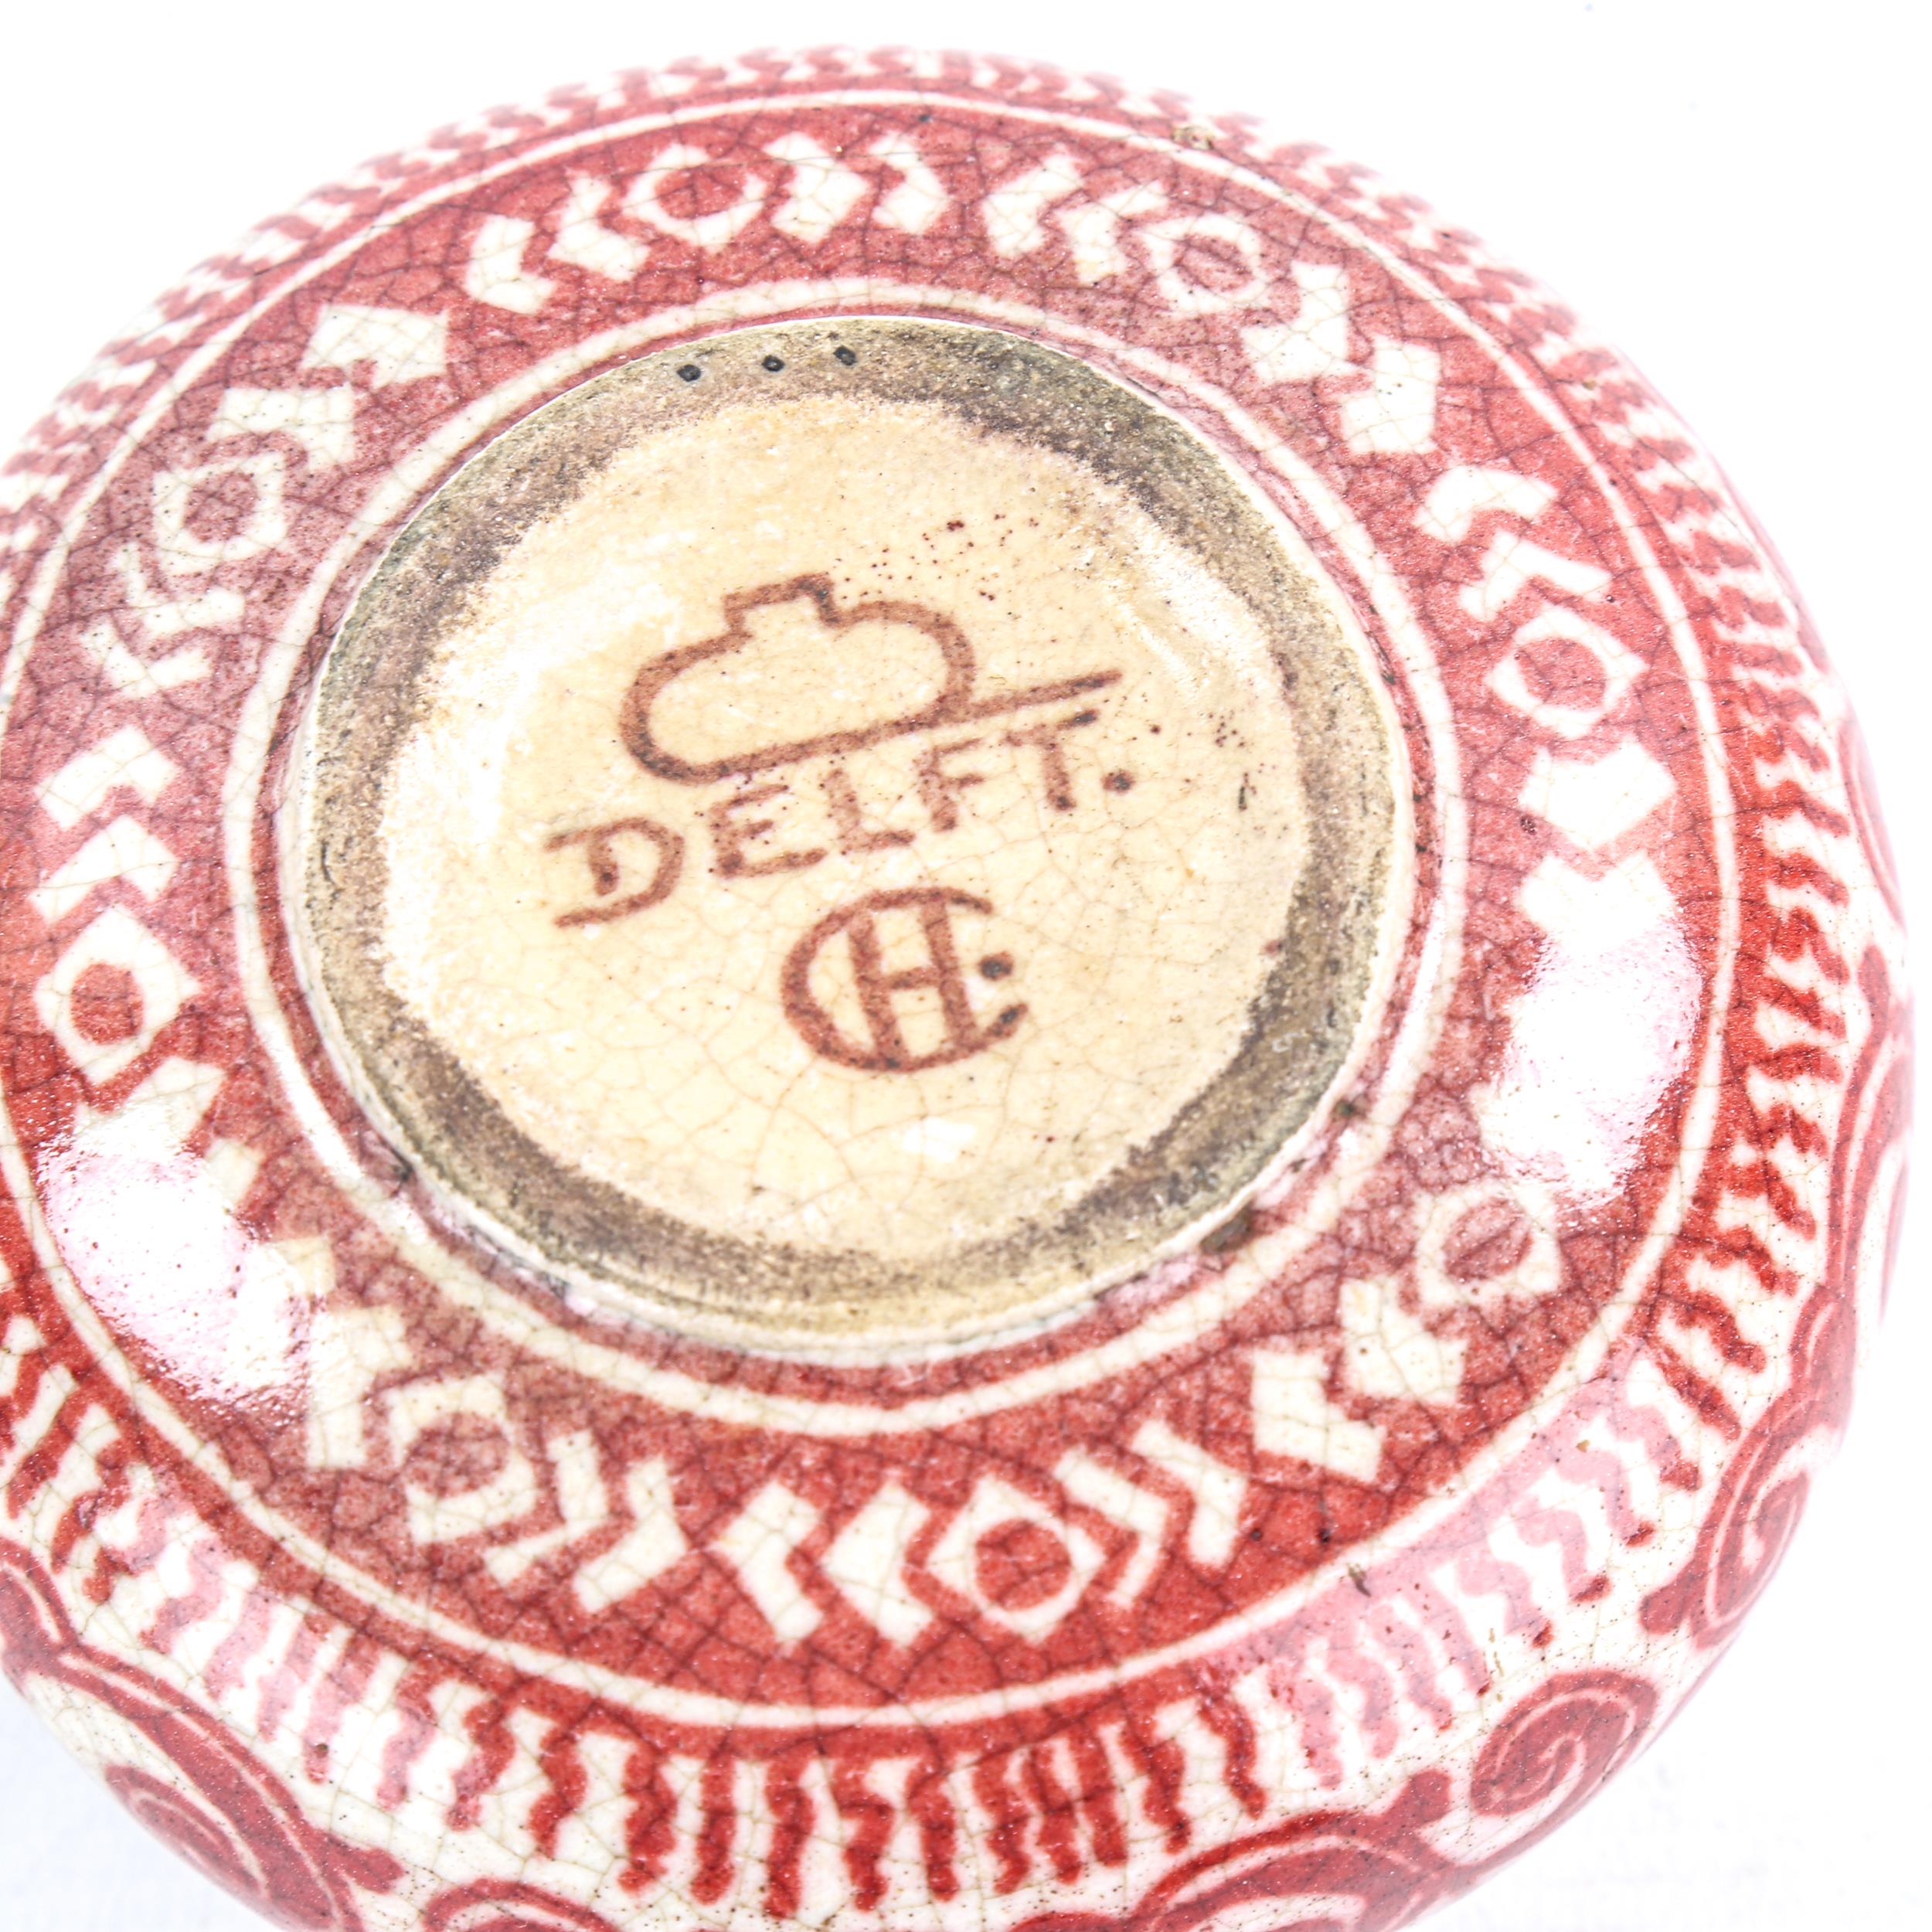 A Delft Pottery vase, with hand painted iron red design, signed with monogram, diameter 12cm - Image 3 of 3